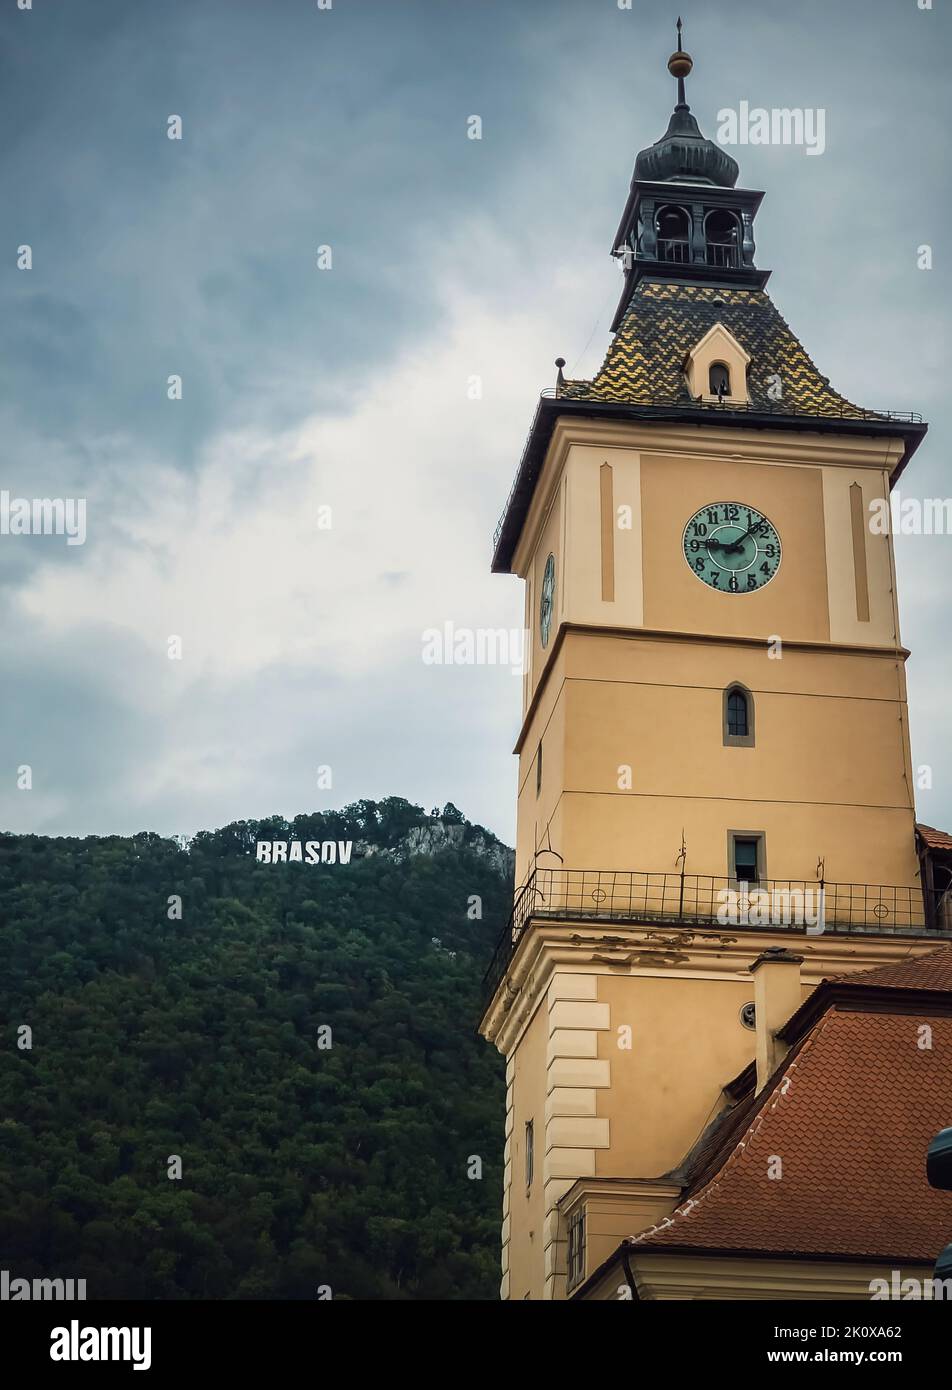 The council house clock tower with a beautiful view to the Brasov sign on top of the hill. Popular tourist location in Romania Stock Photo